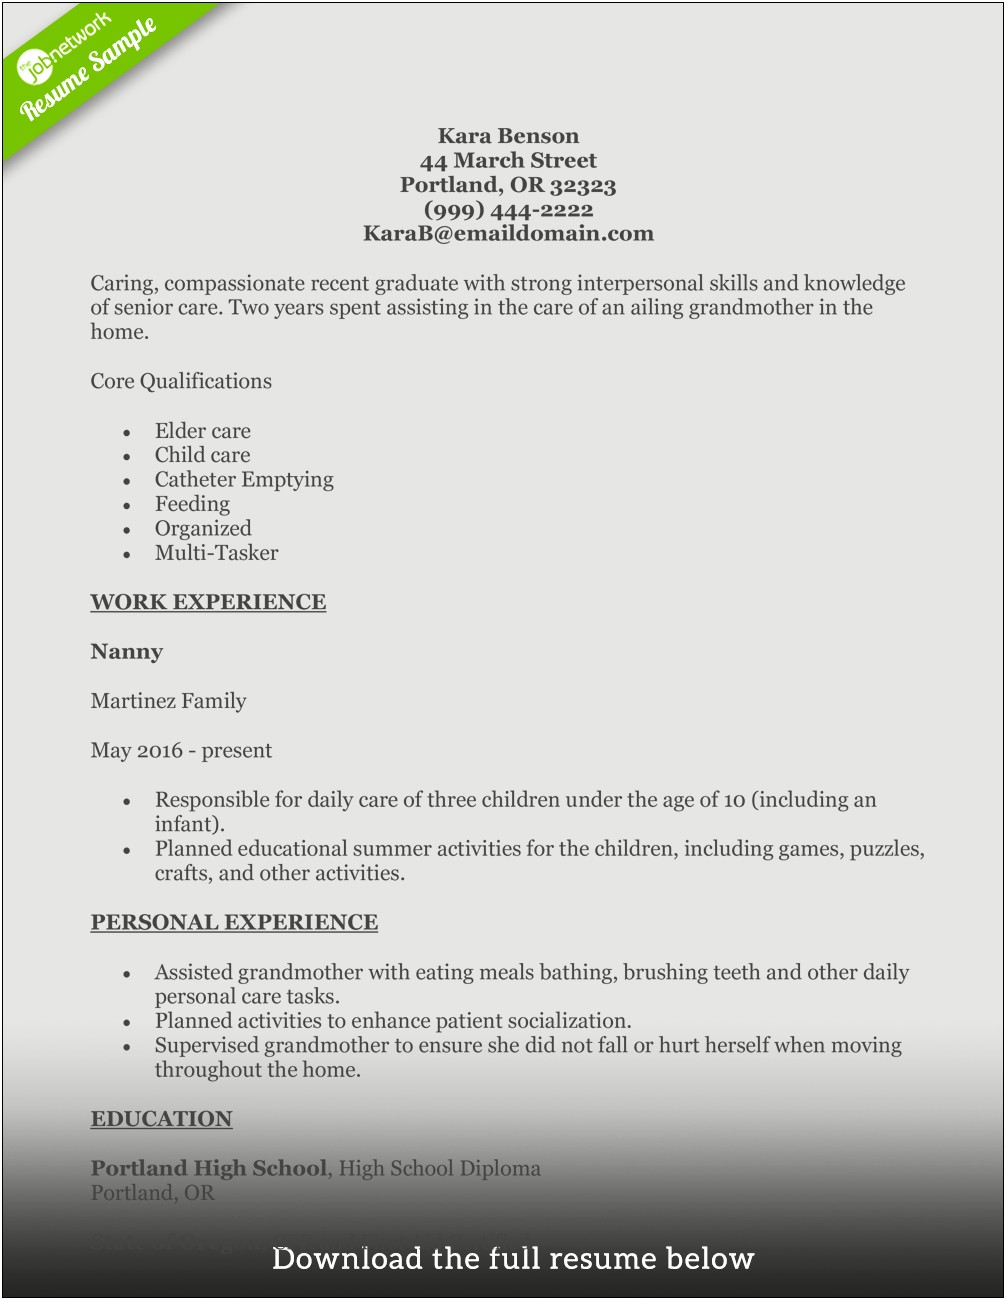 Continuing Care Assistant Resume Sample